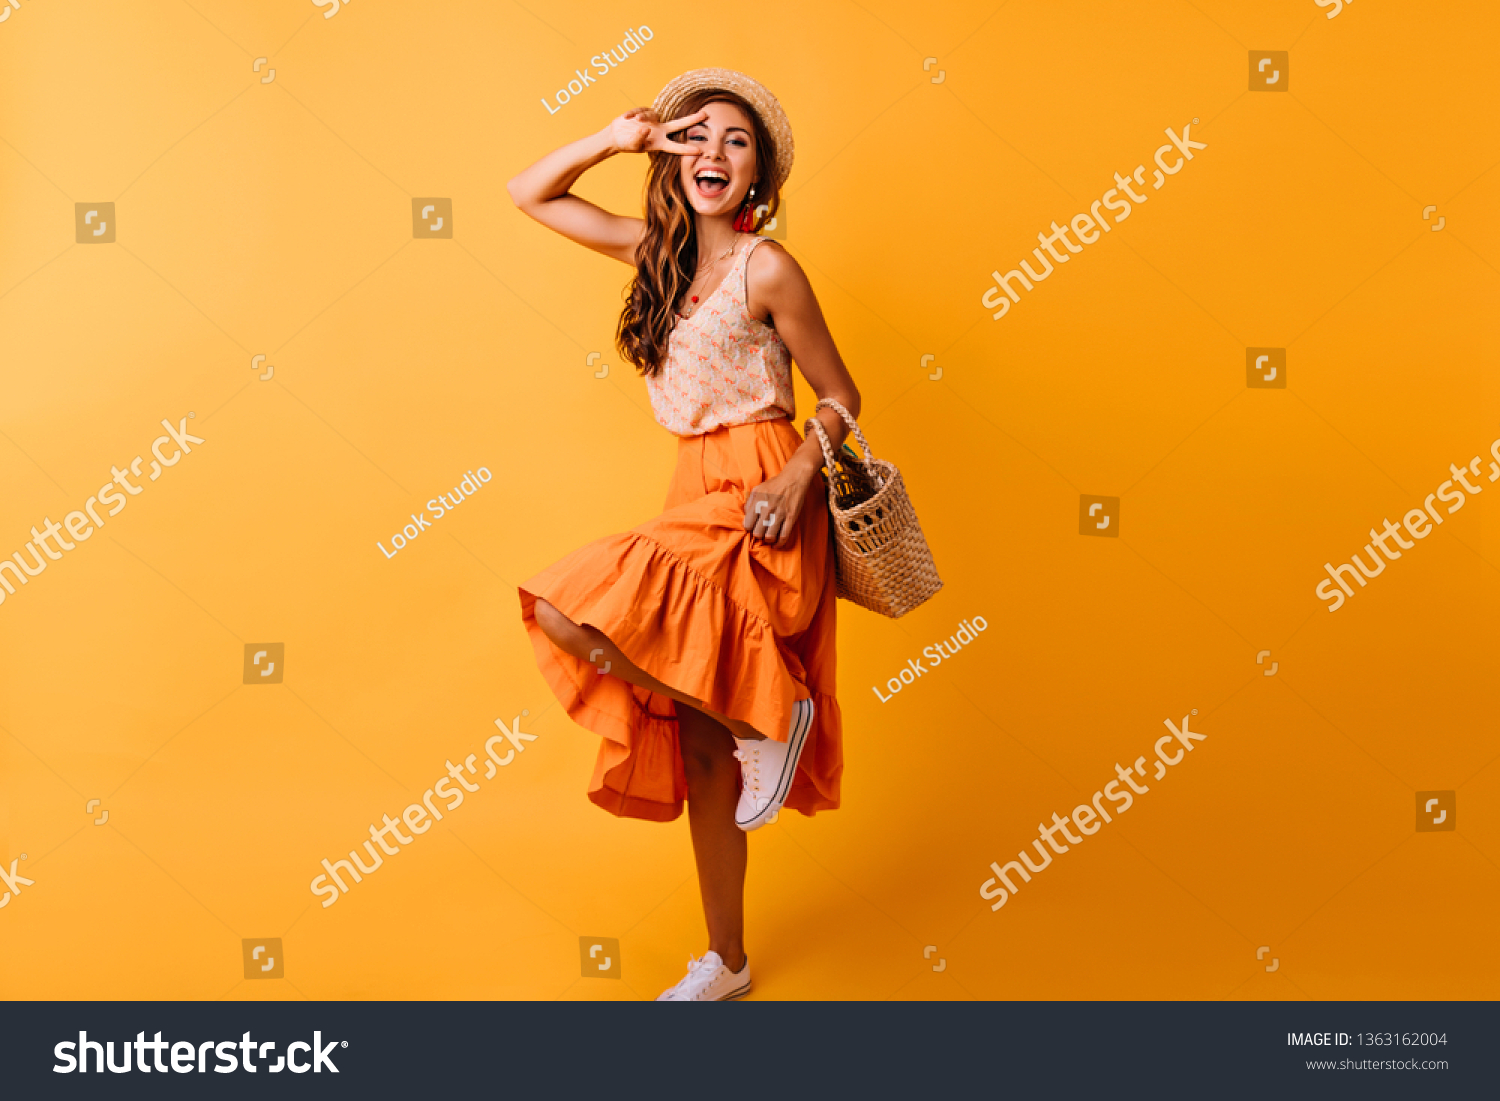 Gorgeous red-haired white woman dancing in studio. Dreamy girl in long skirt having fun on orange background. #1363162004